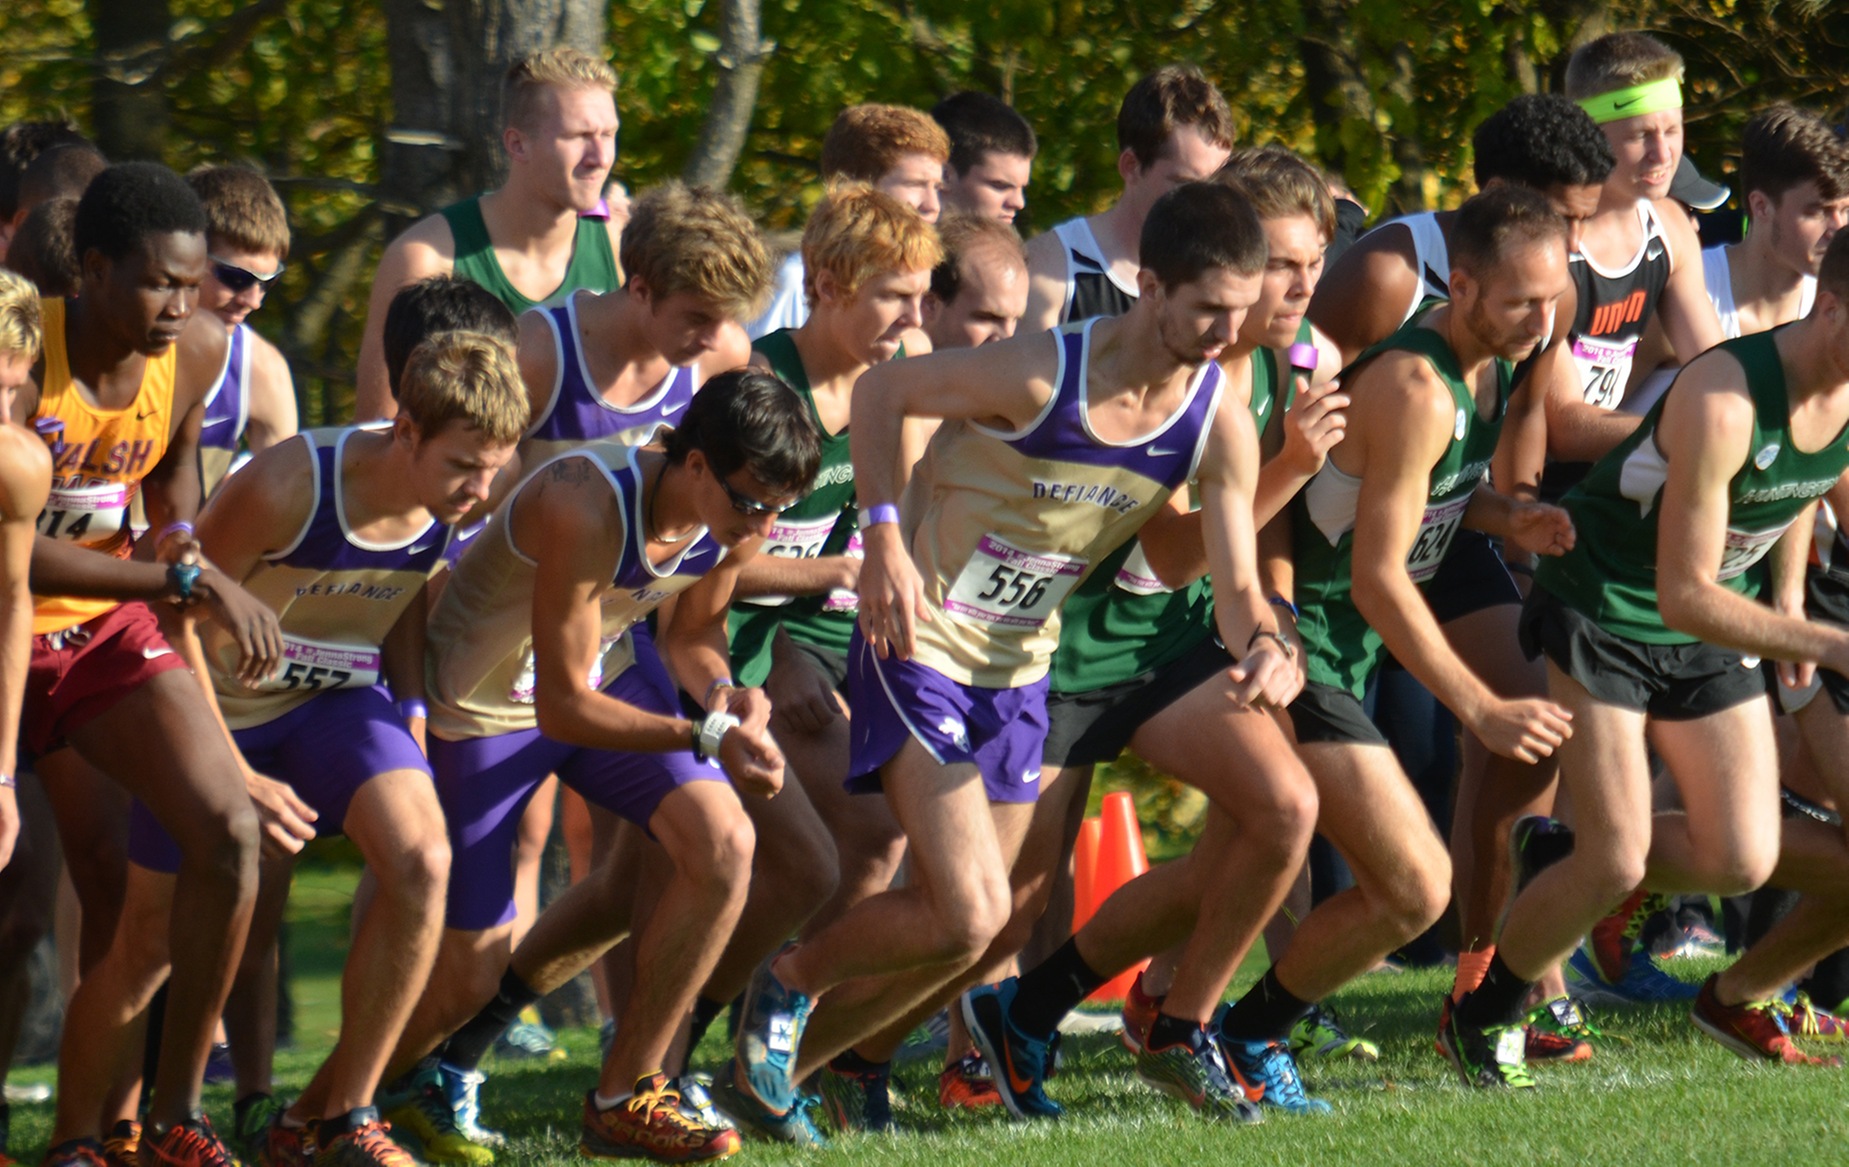 Men's Cross Country Personal Records Shattered at NCAA Regional